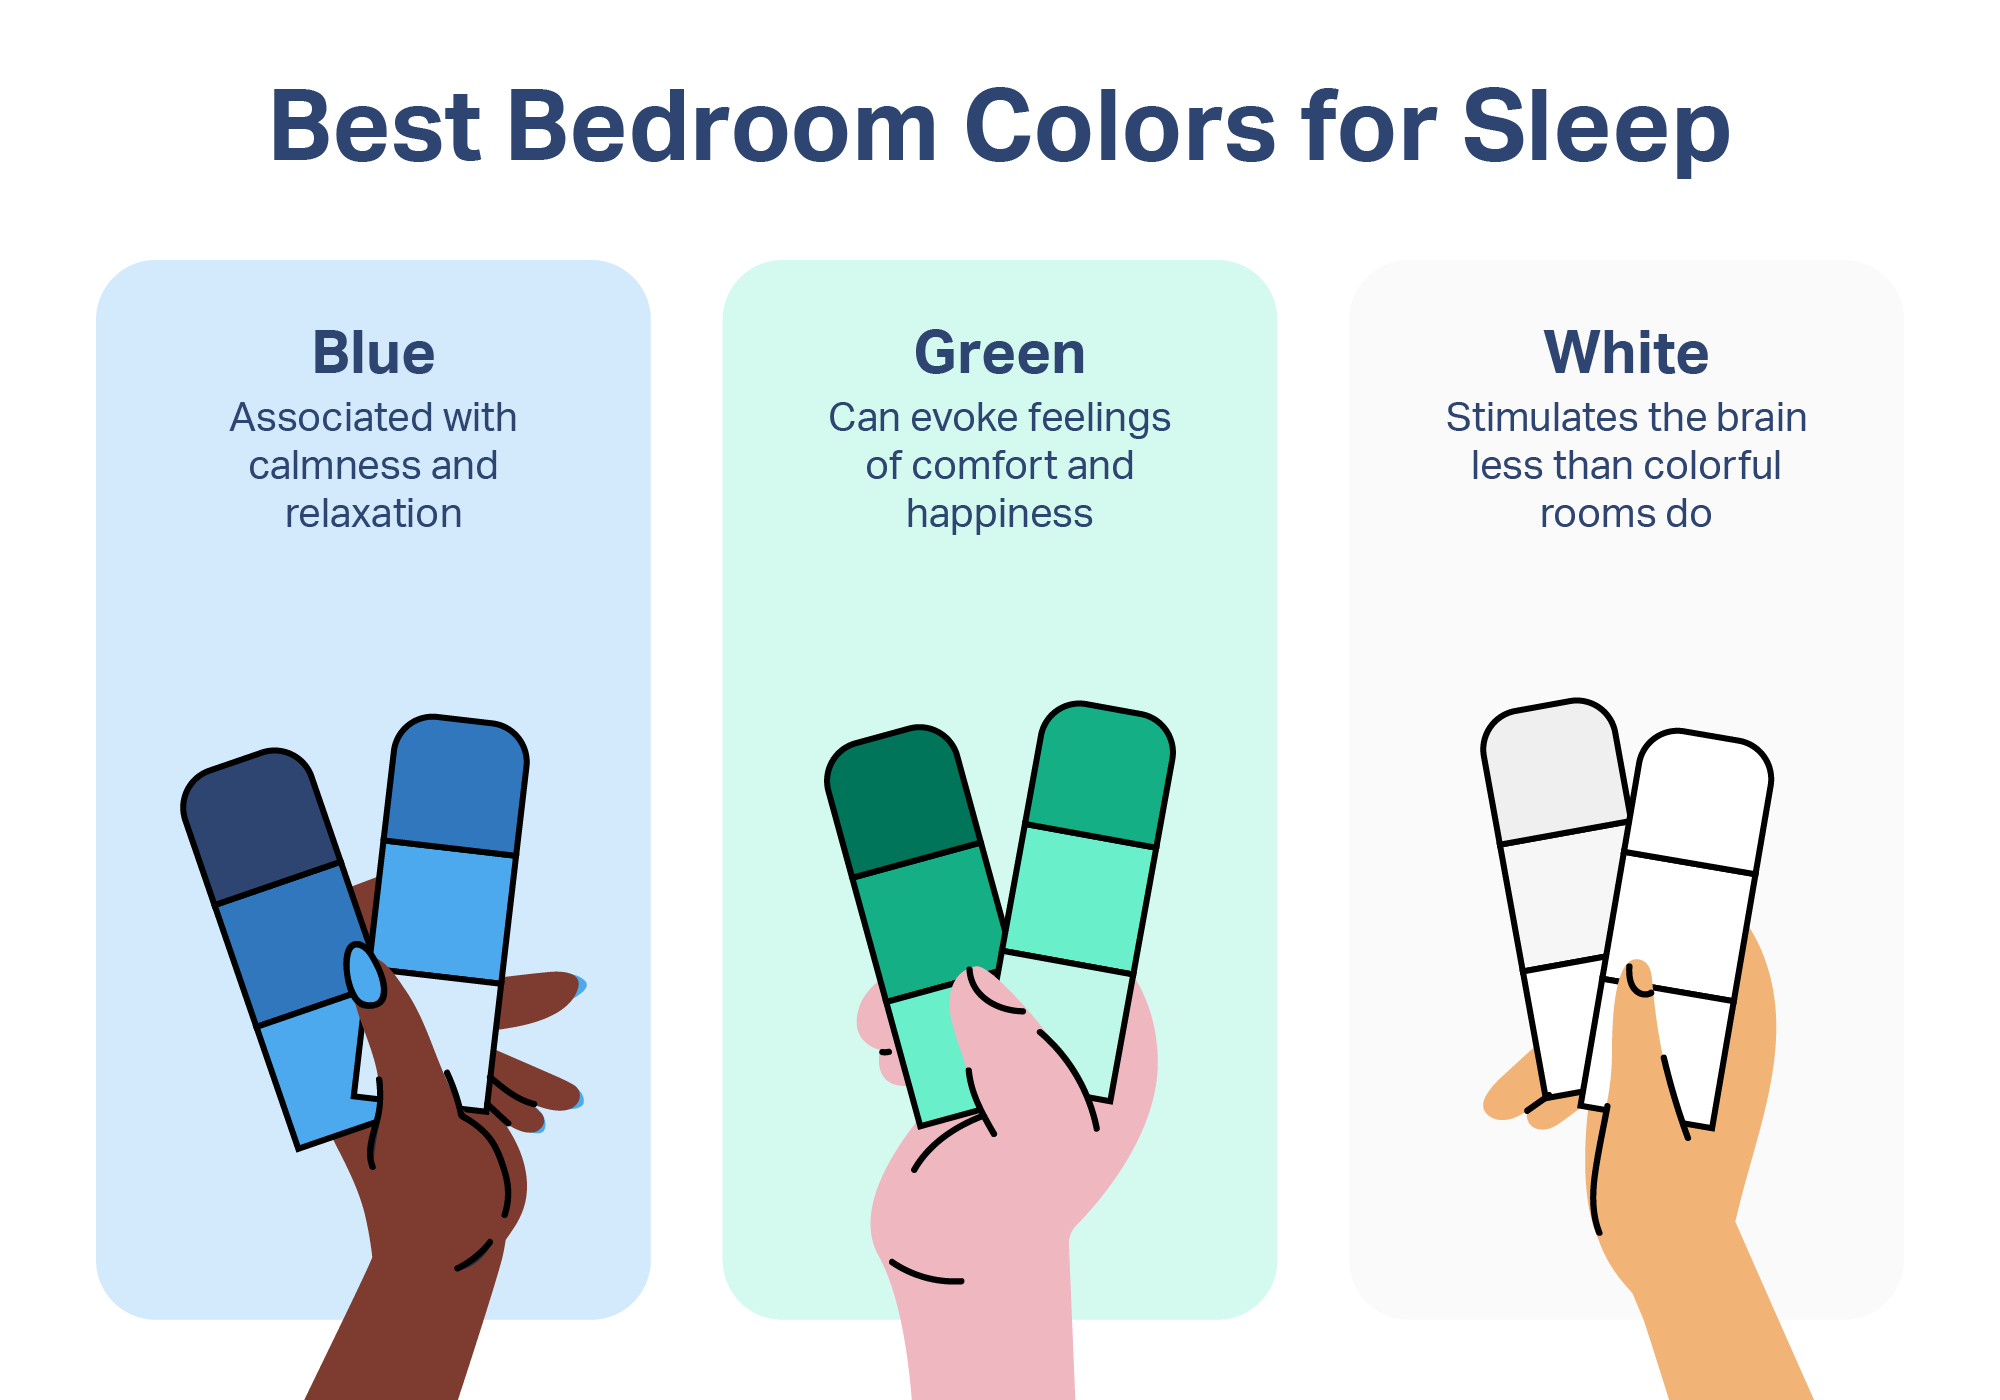 Graphic of the 3 best colors for sleep: blue, green, and white.